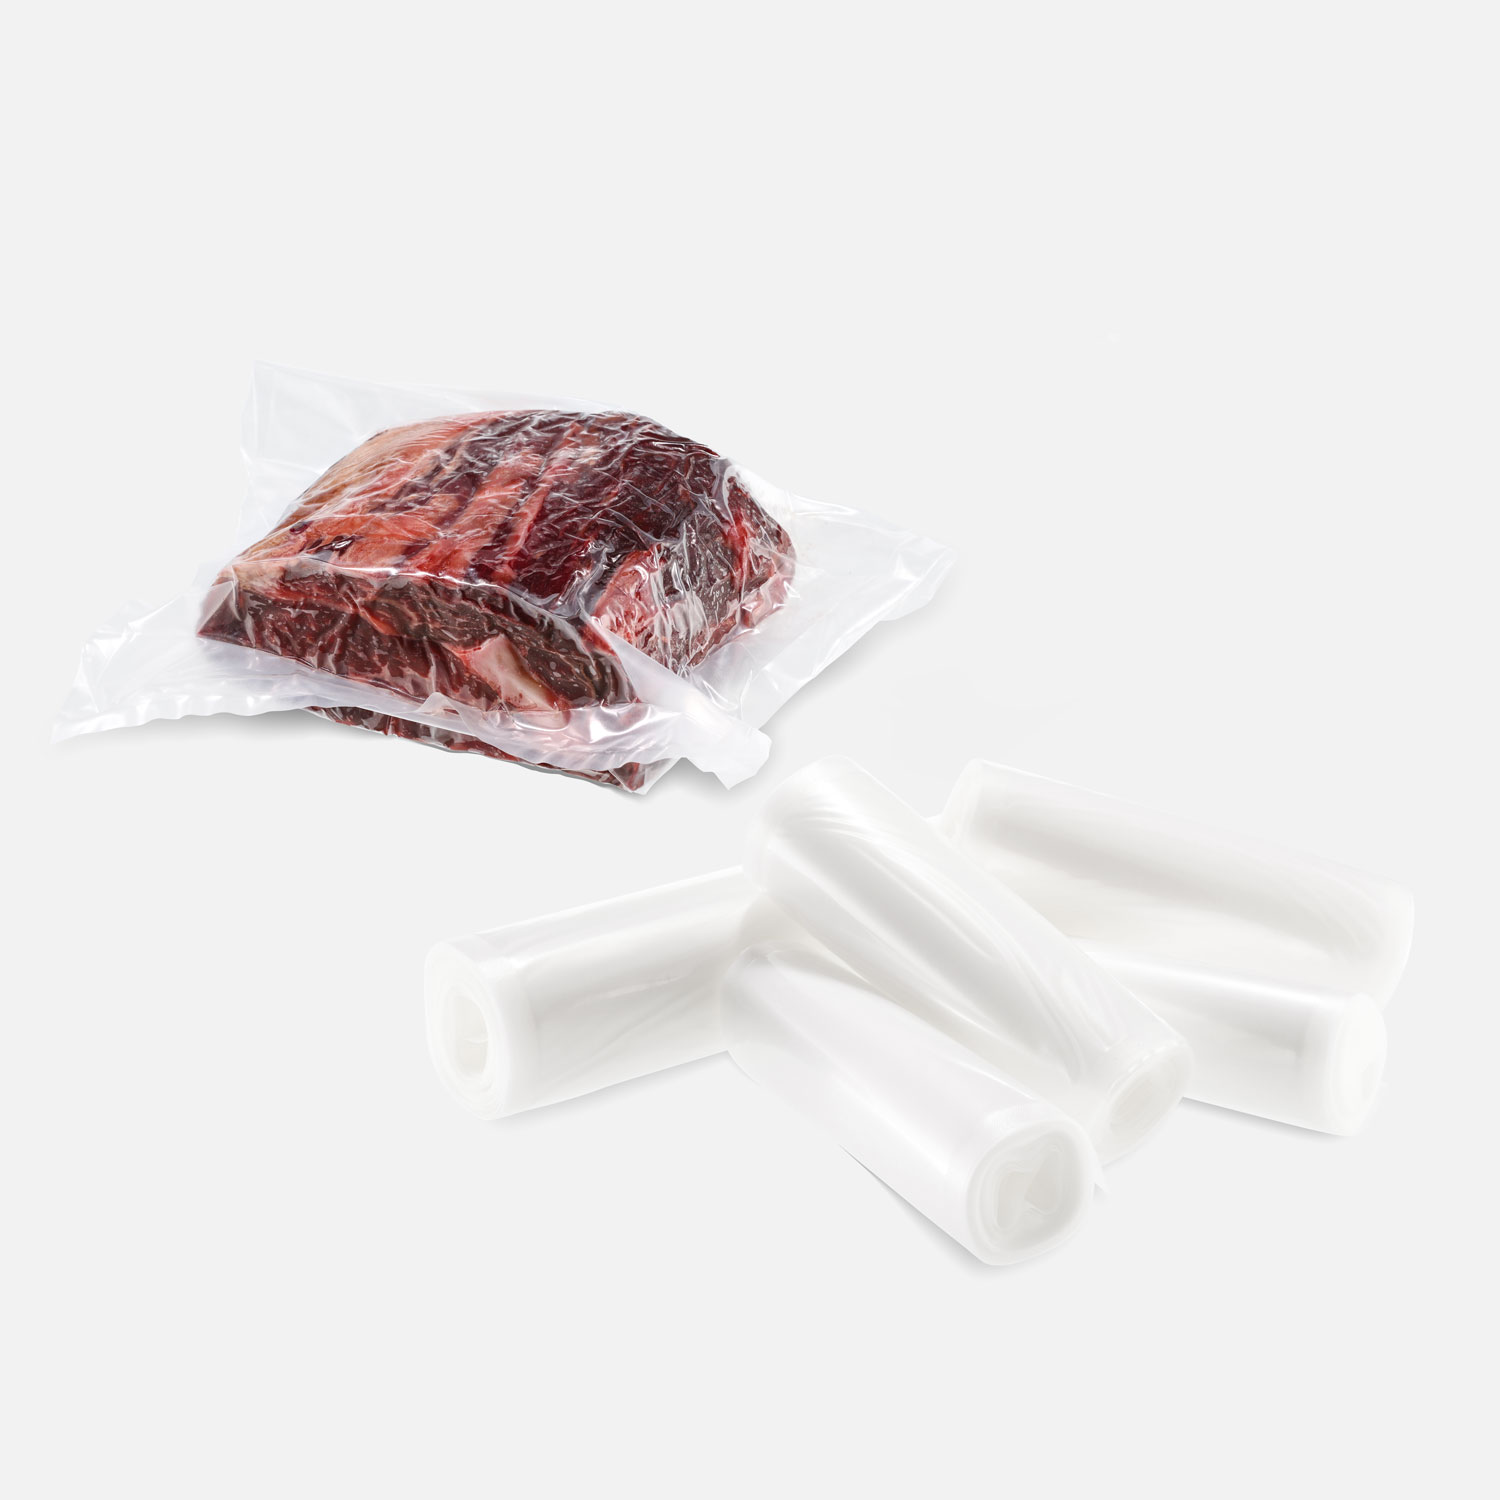 Dry aged beef in a transparent maturing bag